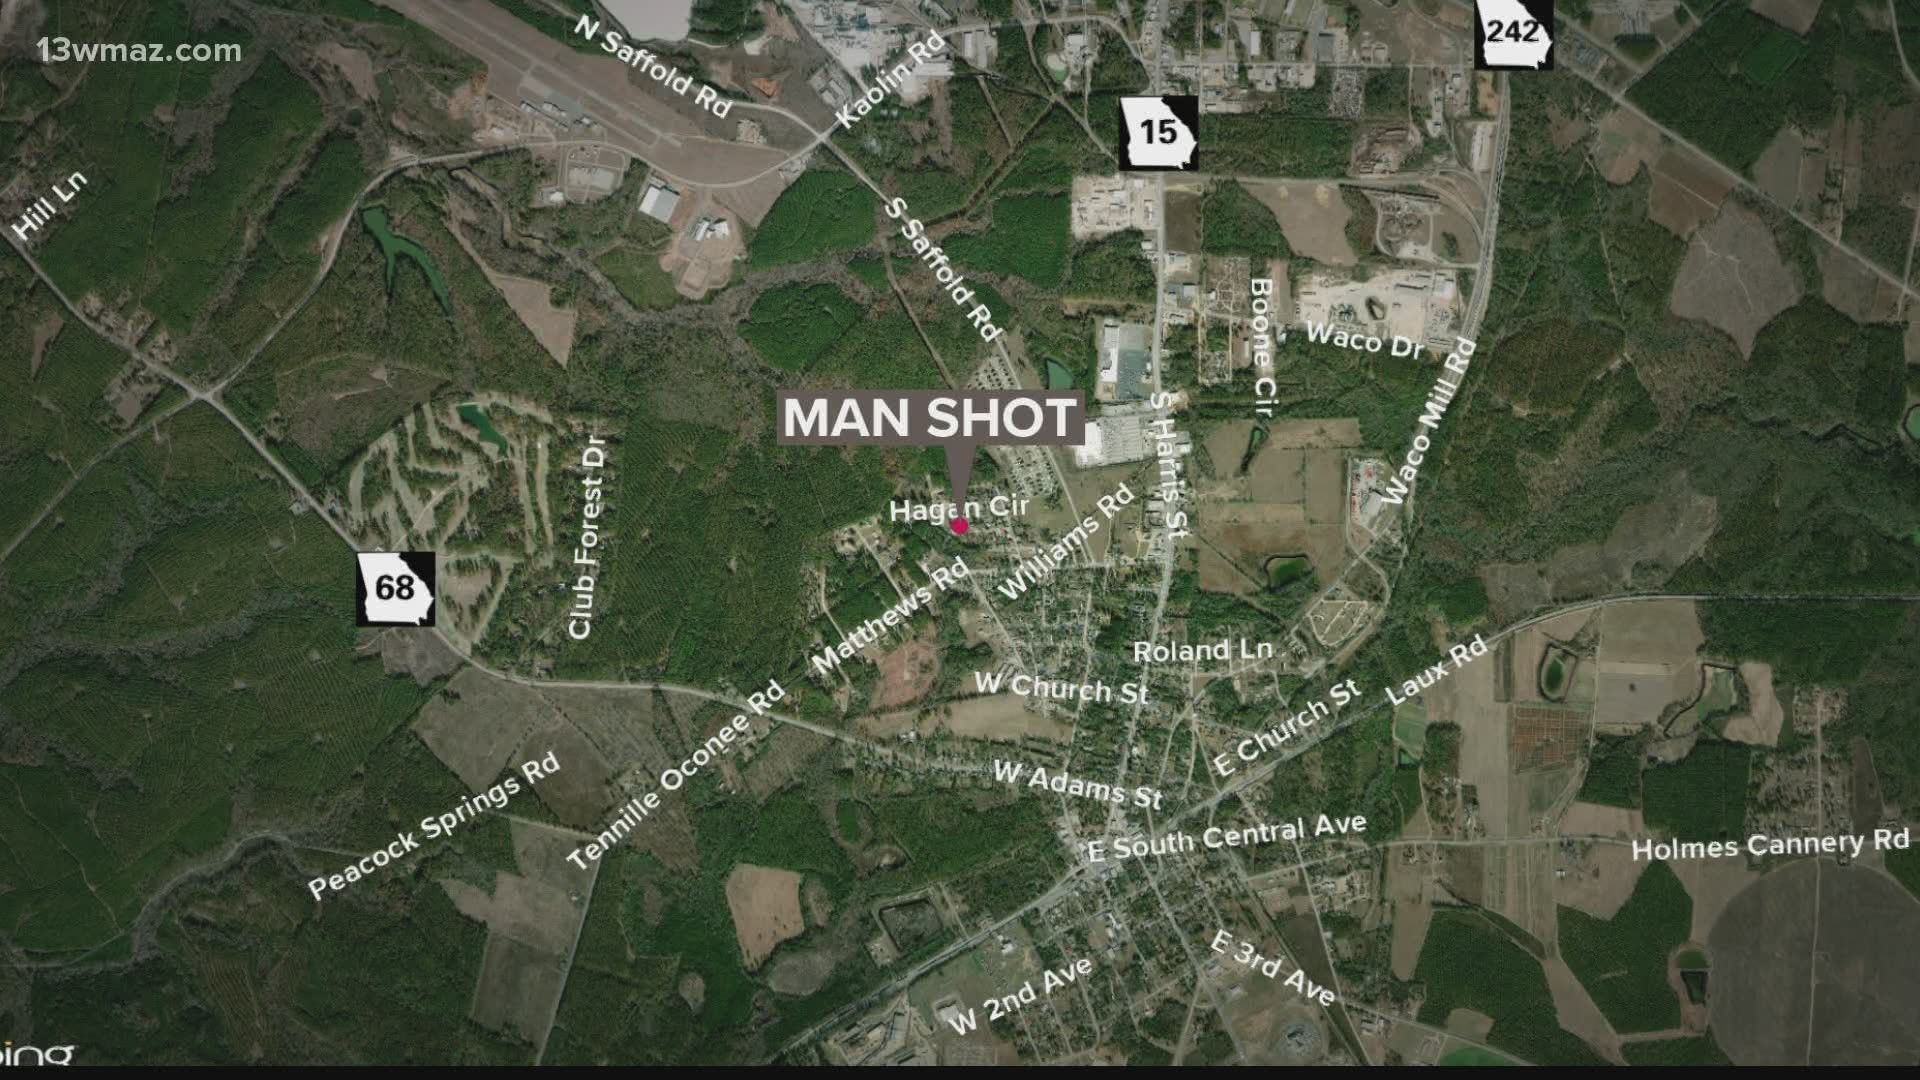 The GBI and Washington County Sheriff’s Office is investigating after a man was shot to death Saturday night.